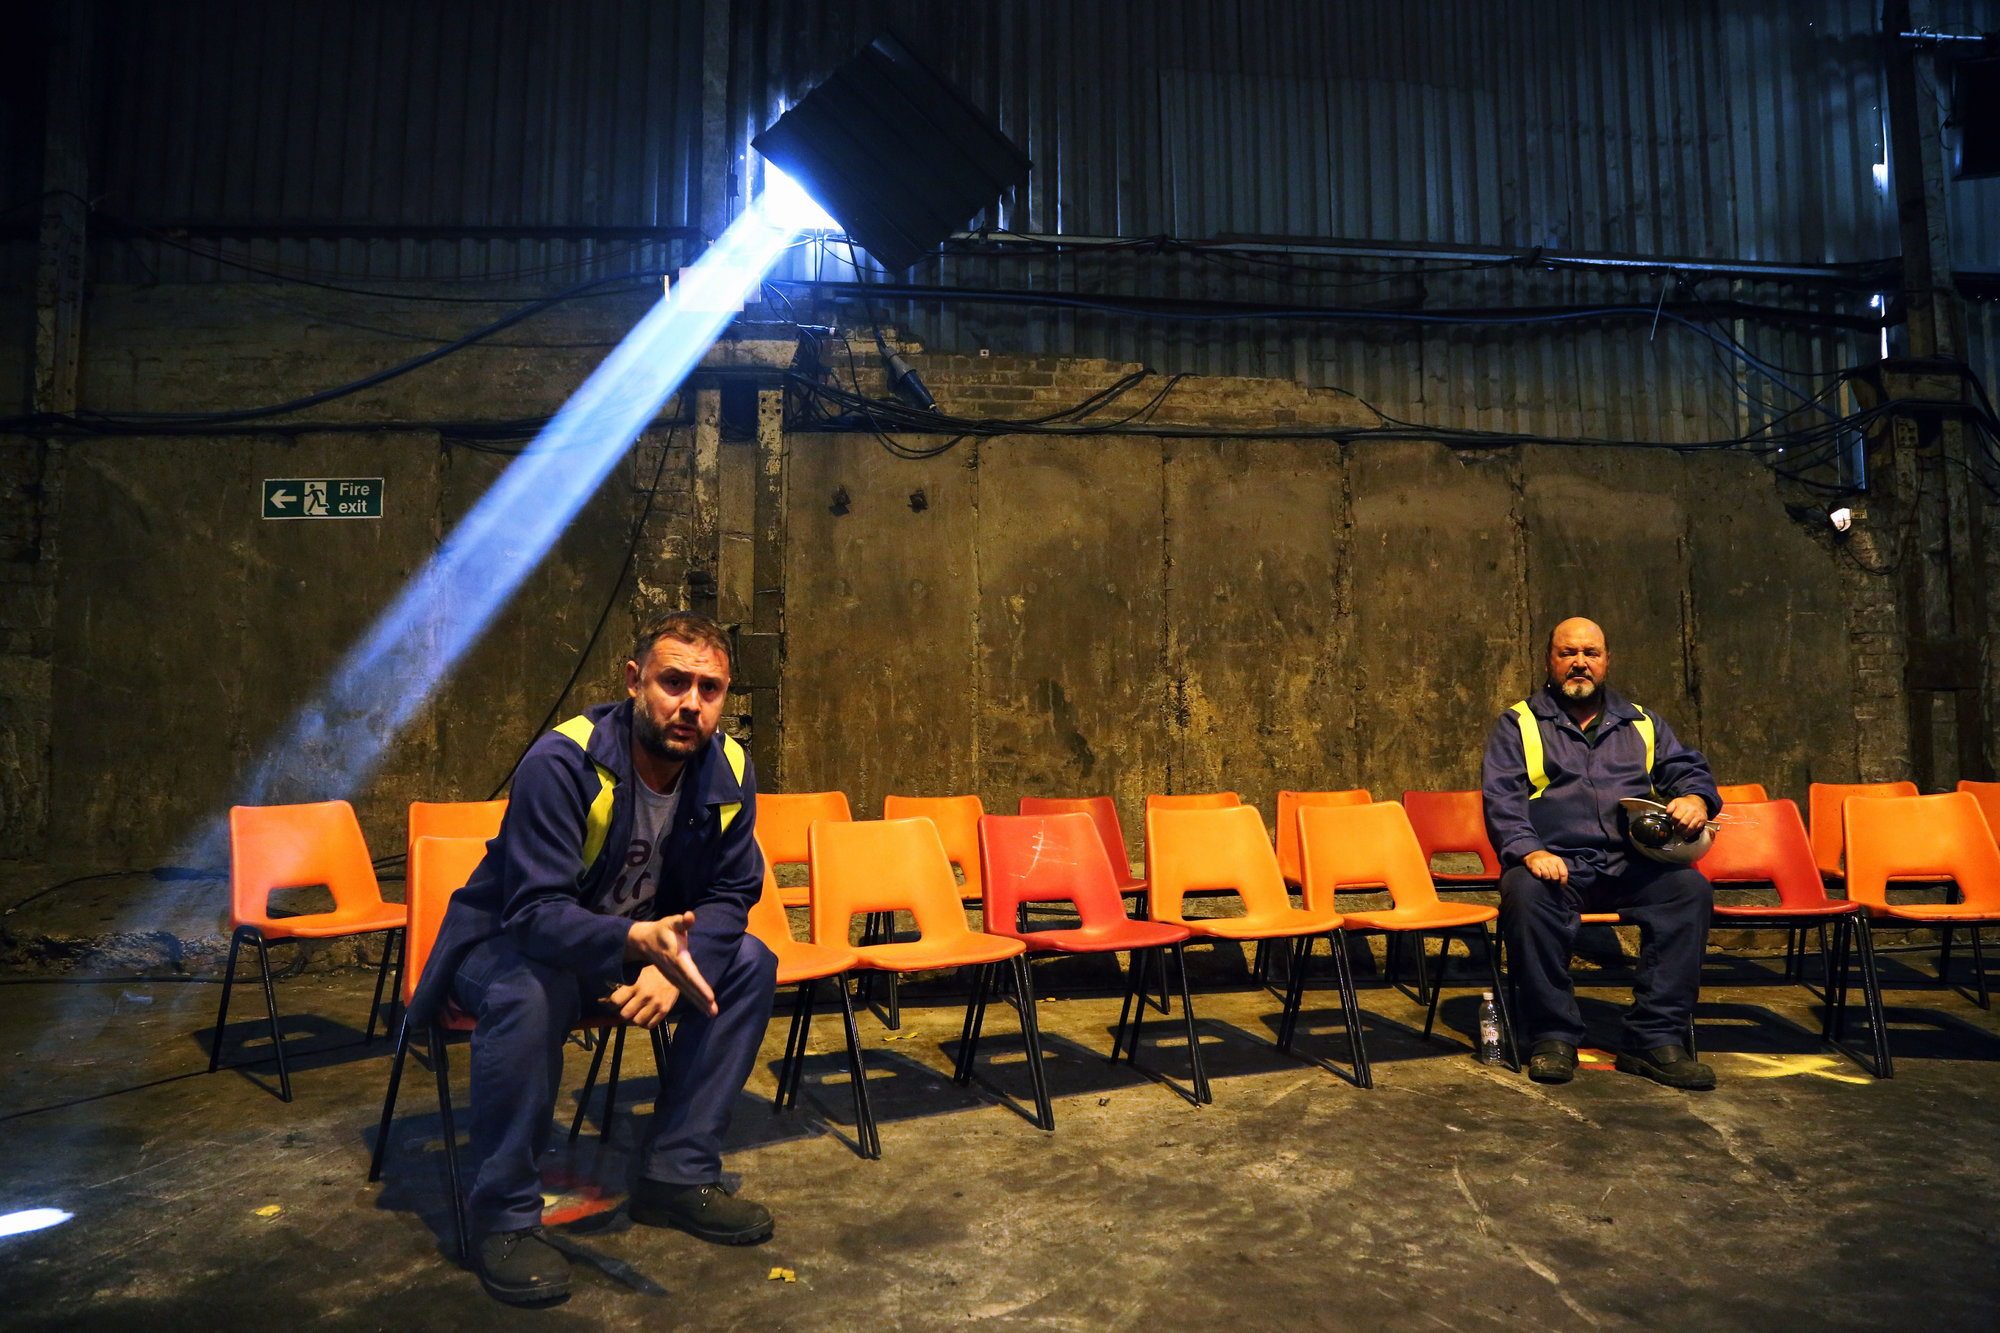 Pictured: Actors Simon Nehan and Sion Tudor Owen Re: Press rehearsal of "We'Re Still Here", a play created by Rachel Trezise, Common Wealth and the National Theatre Wales about steelworkers, which will be performed in Byass Works, a disused industrial unit, in Port Talbot, south Wales, UK.